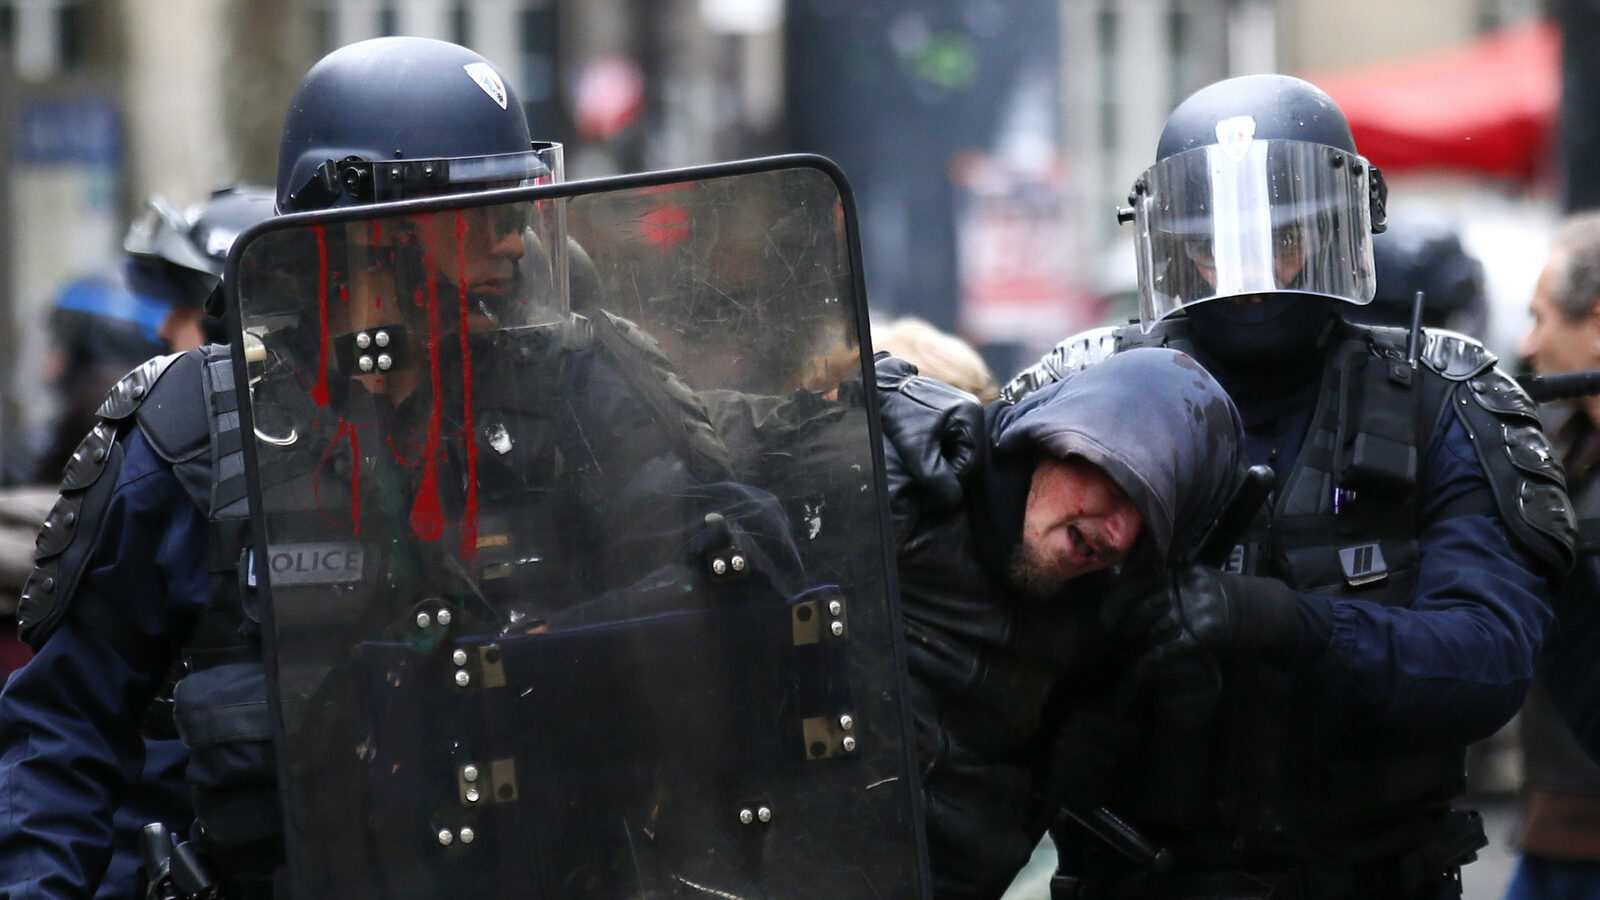 Riot police officers detain a demonstrator during a protest in Paris, Tuesday, Oct.10, 2017. Police are using tear gas and batons to push back protesters throwing projectiles at a demonstration in Paris over public sector job cuts and salary freezes. (AP Photo/Francois Mori)